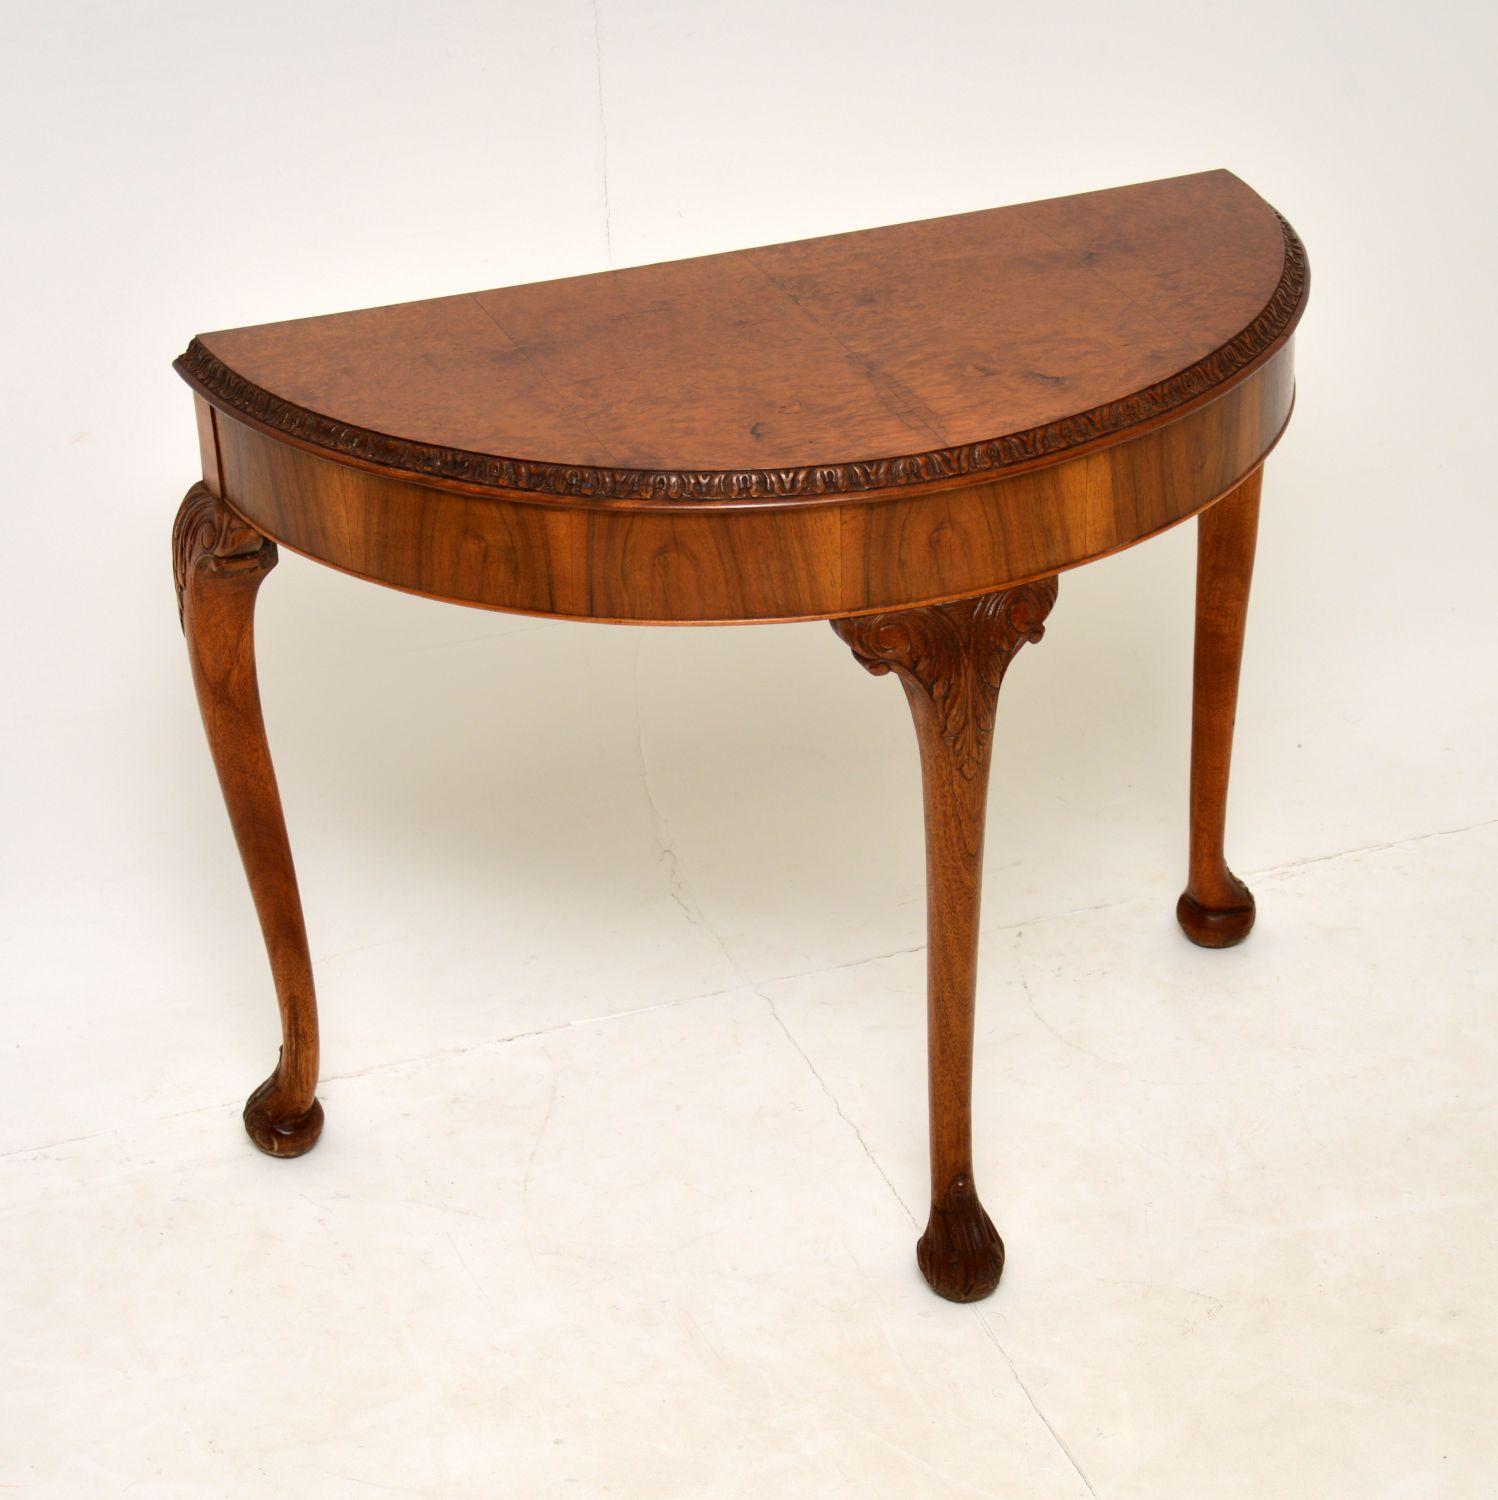 A beautiful burr walnut console side table, in the antique Queen Anne style. This dates from the 1930’s, it was made in England.

The quality is excellent, and it is a useful size. There are gorgeous burr walnut grain patterns, the colour is